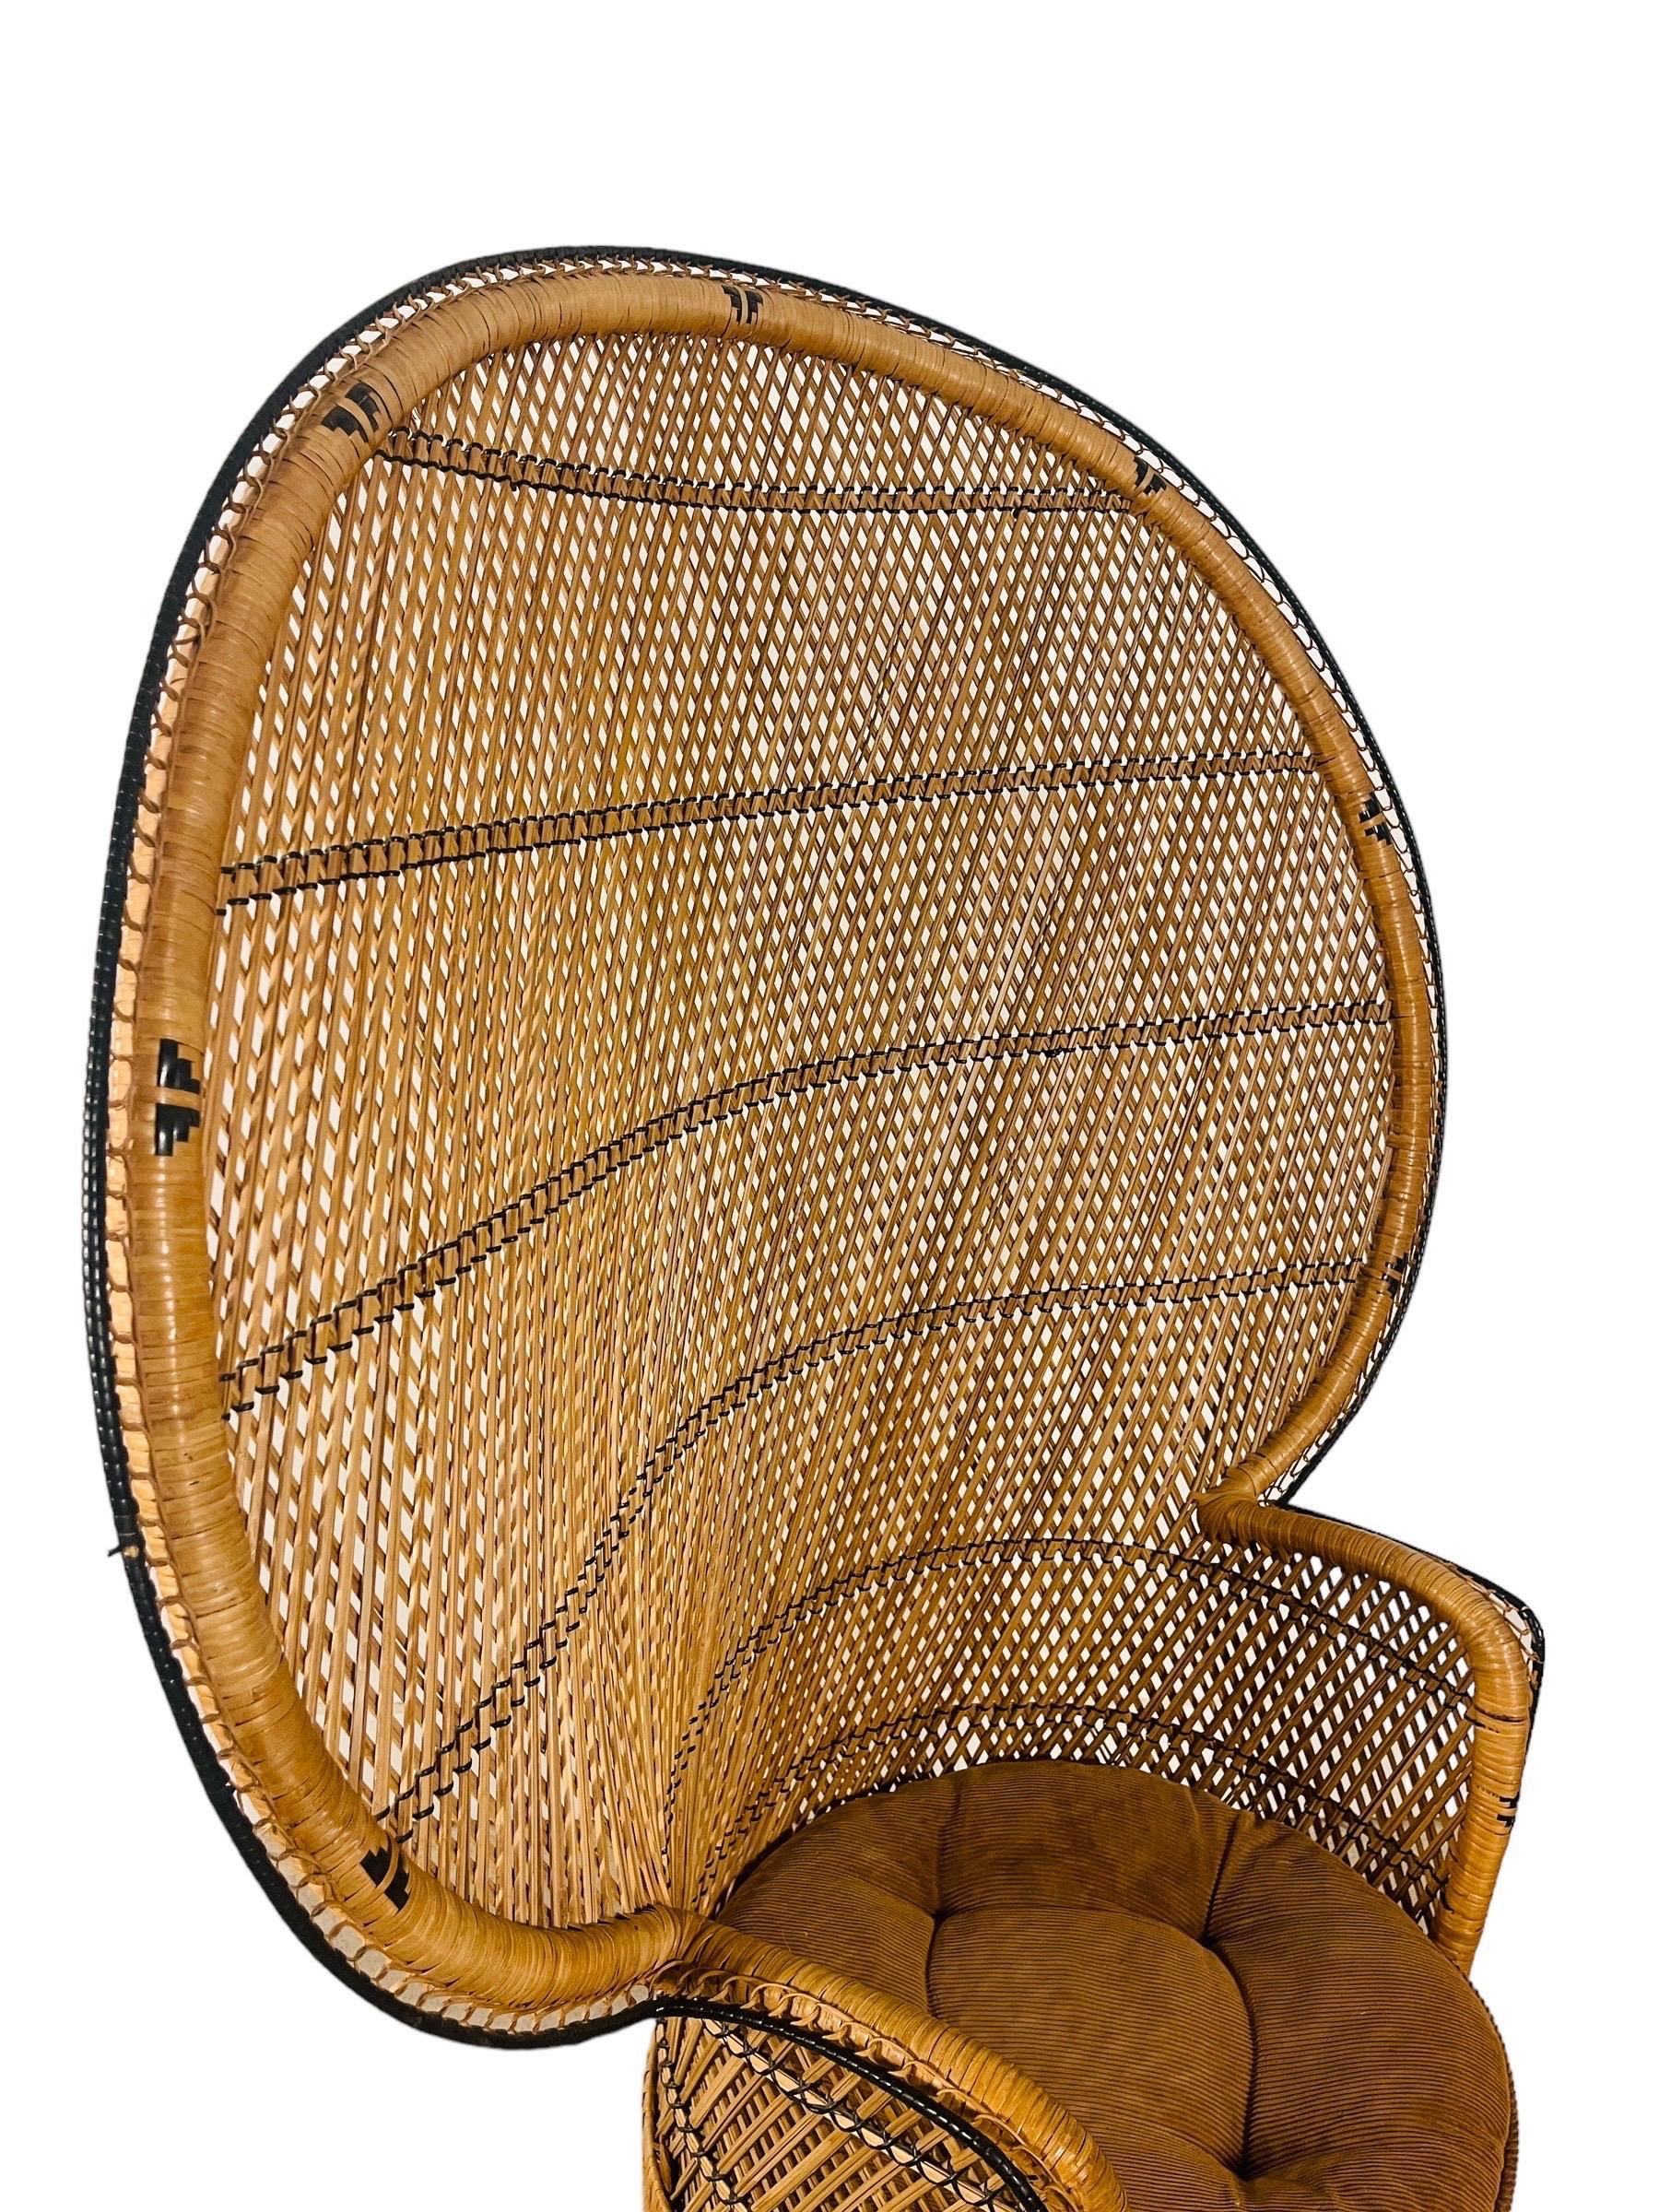 Vintage Boho Chic Wicker, Rattan Peacock Chair For Sale 2